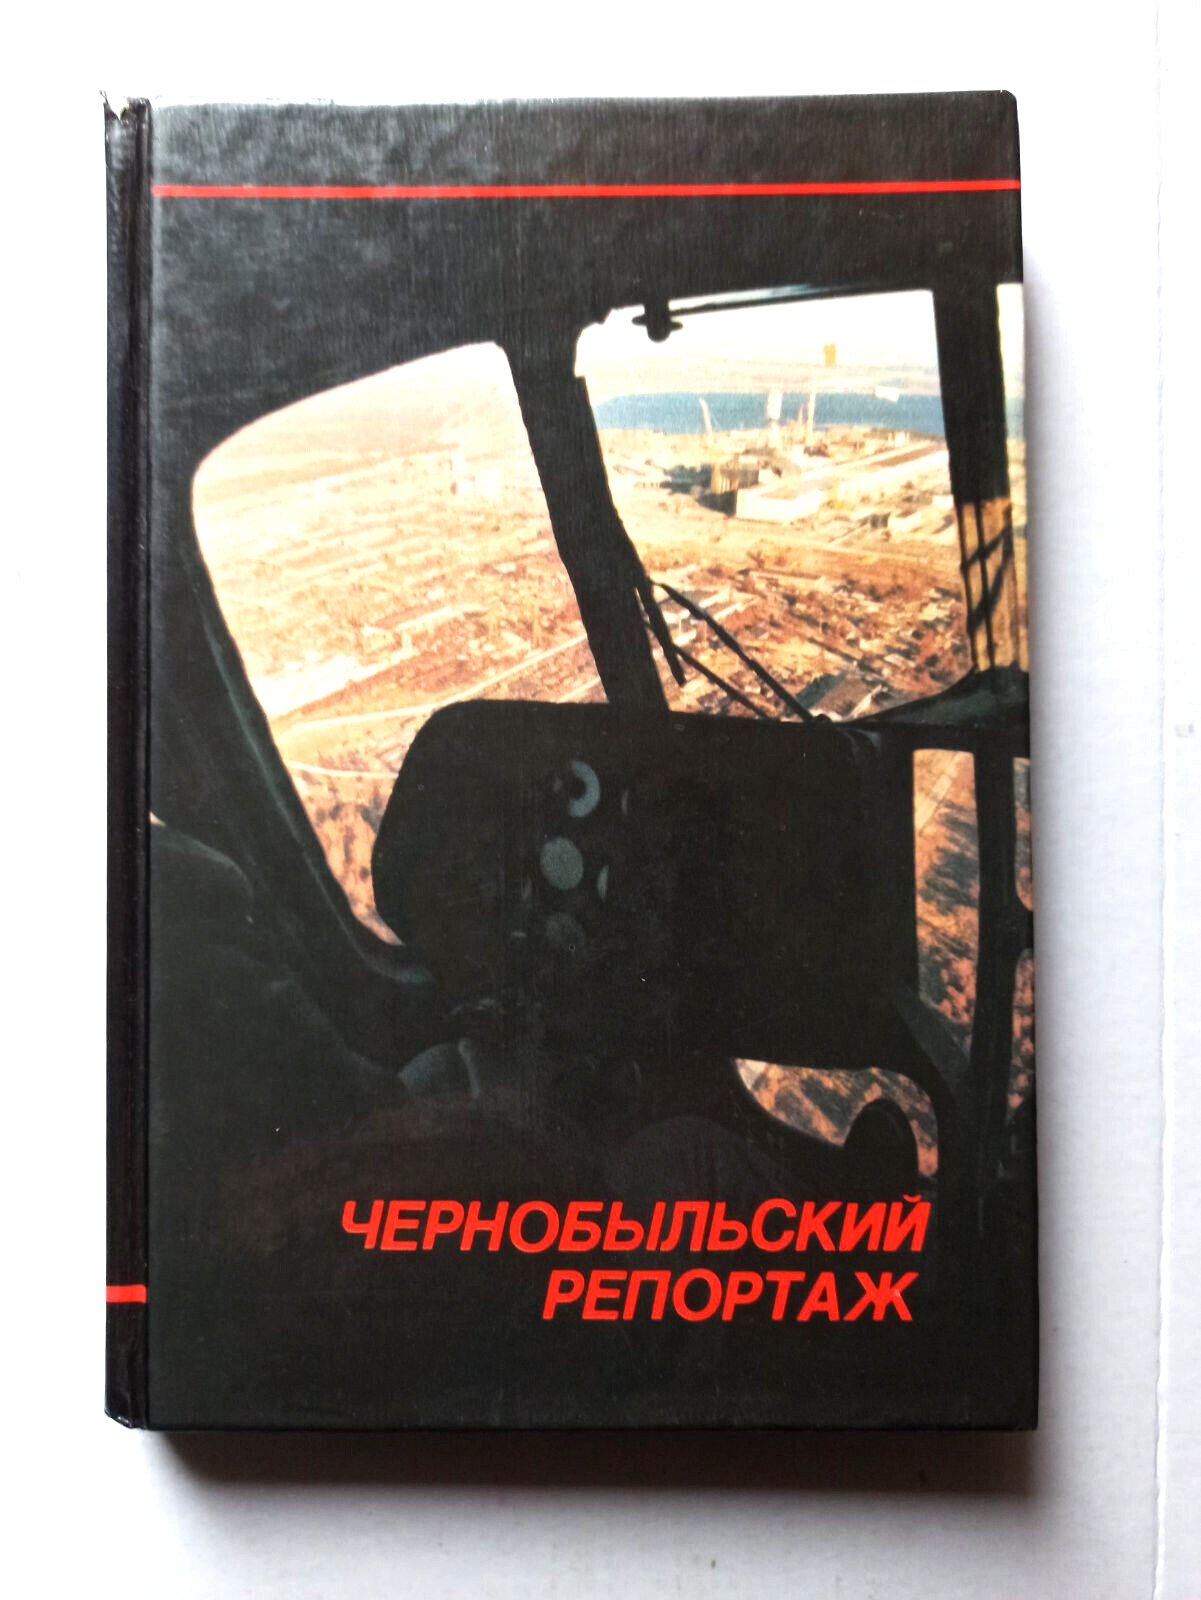 1989 Chernobyl reportage Nuclear reactor ChAES Disaster Photo Album Russian book